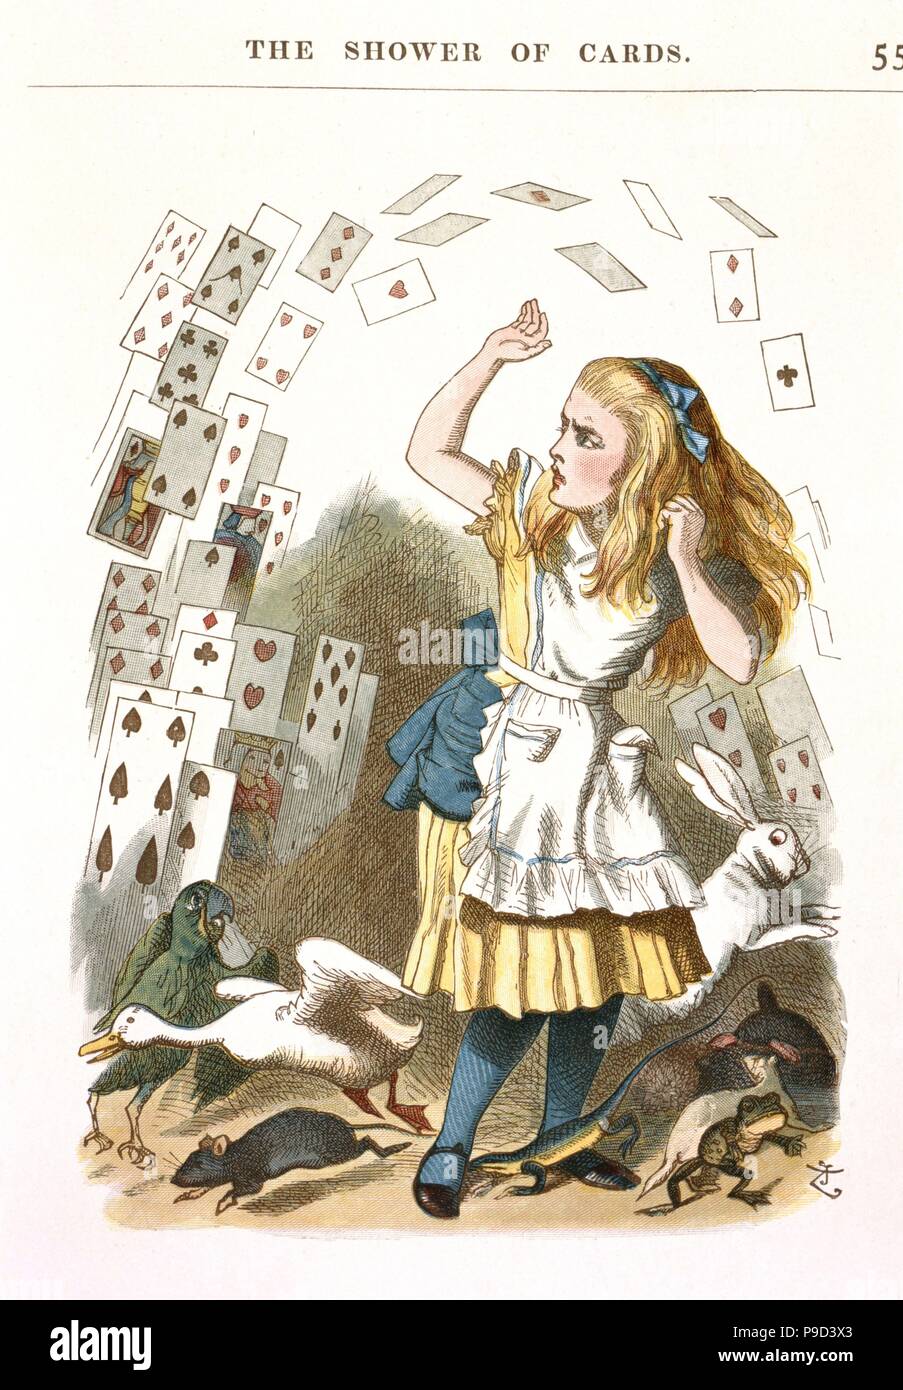 https://c8.alamy.com/comp/P9D3X3/the-shower-of-cards-illustration-for-alice-in-wonderland-by-l-carroll-museum-private-collection-P9D3X3.jpg